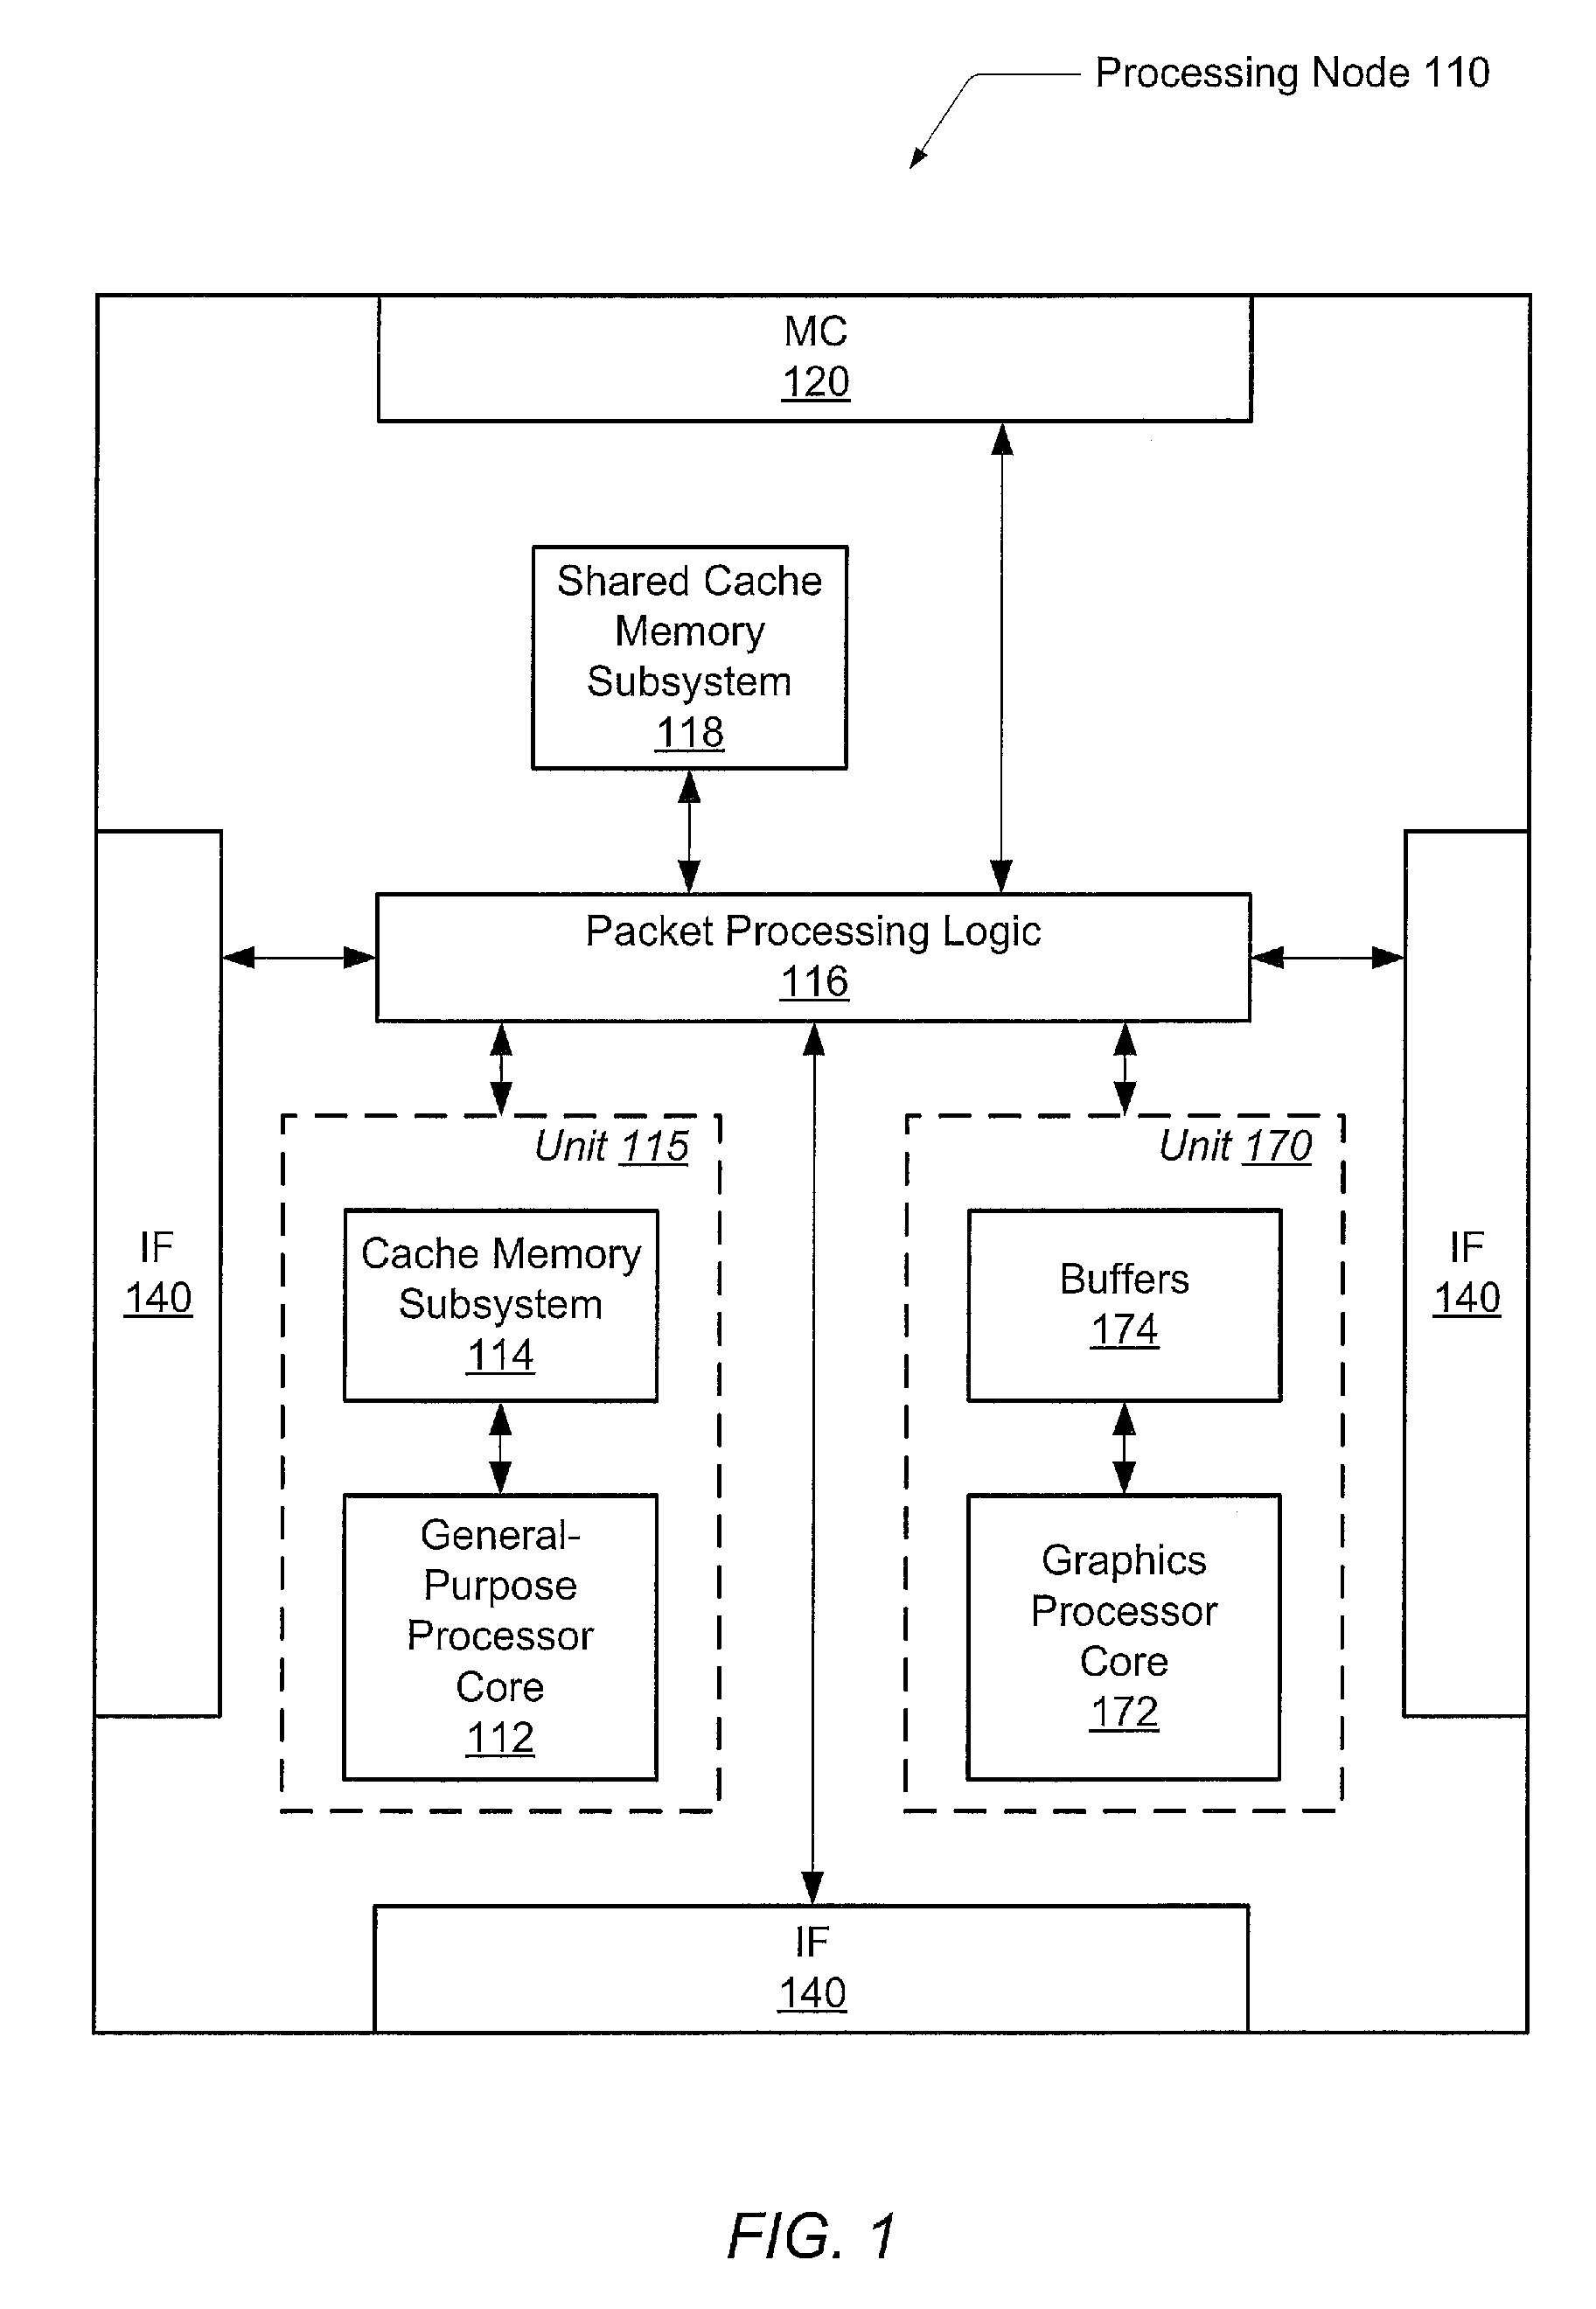 Automatic load balancing for heterogeneous cores